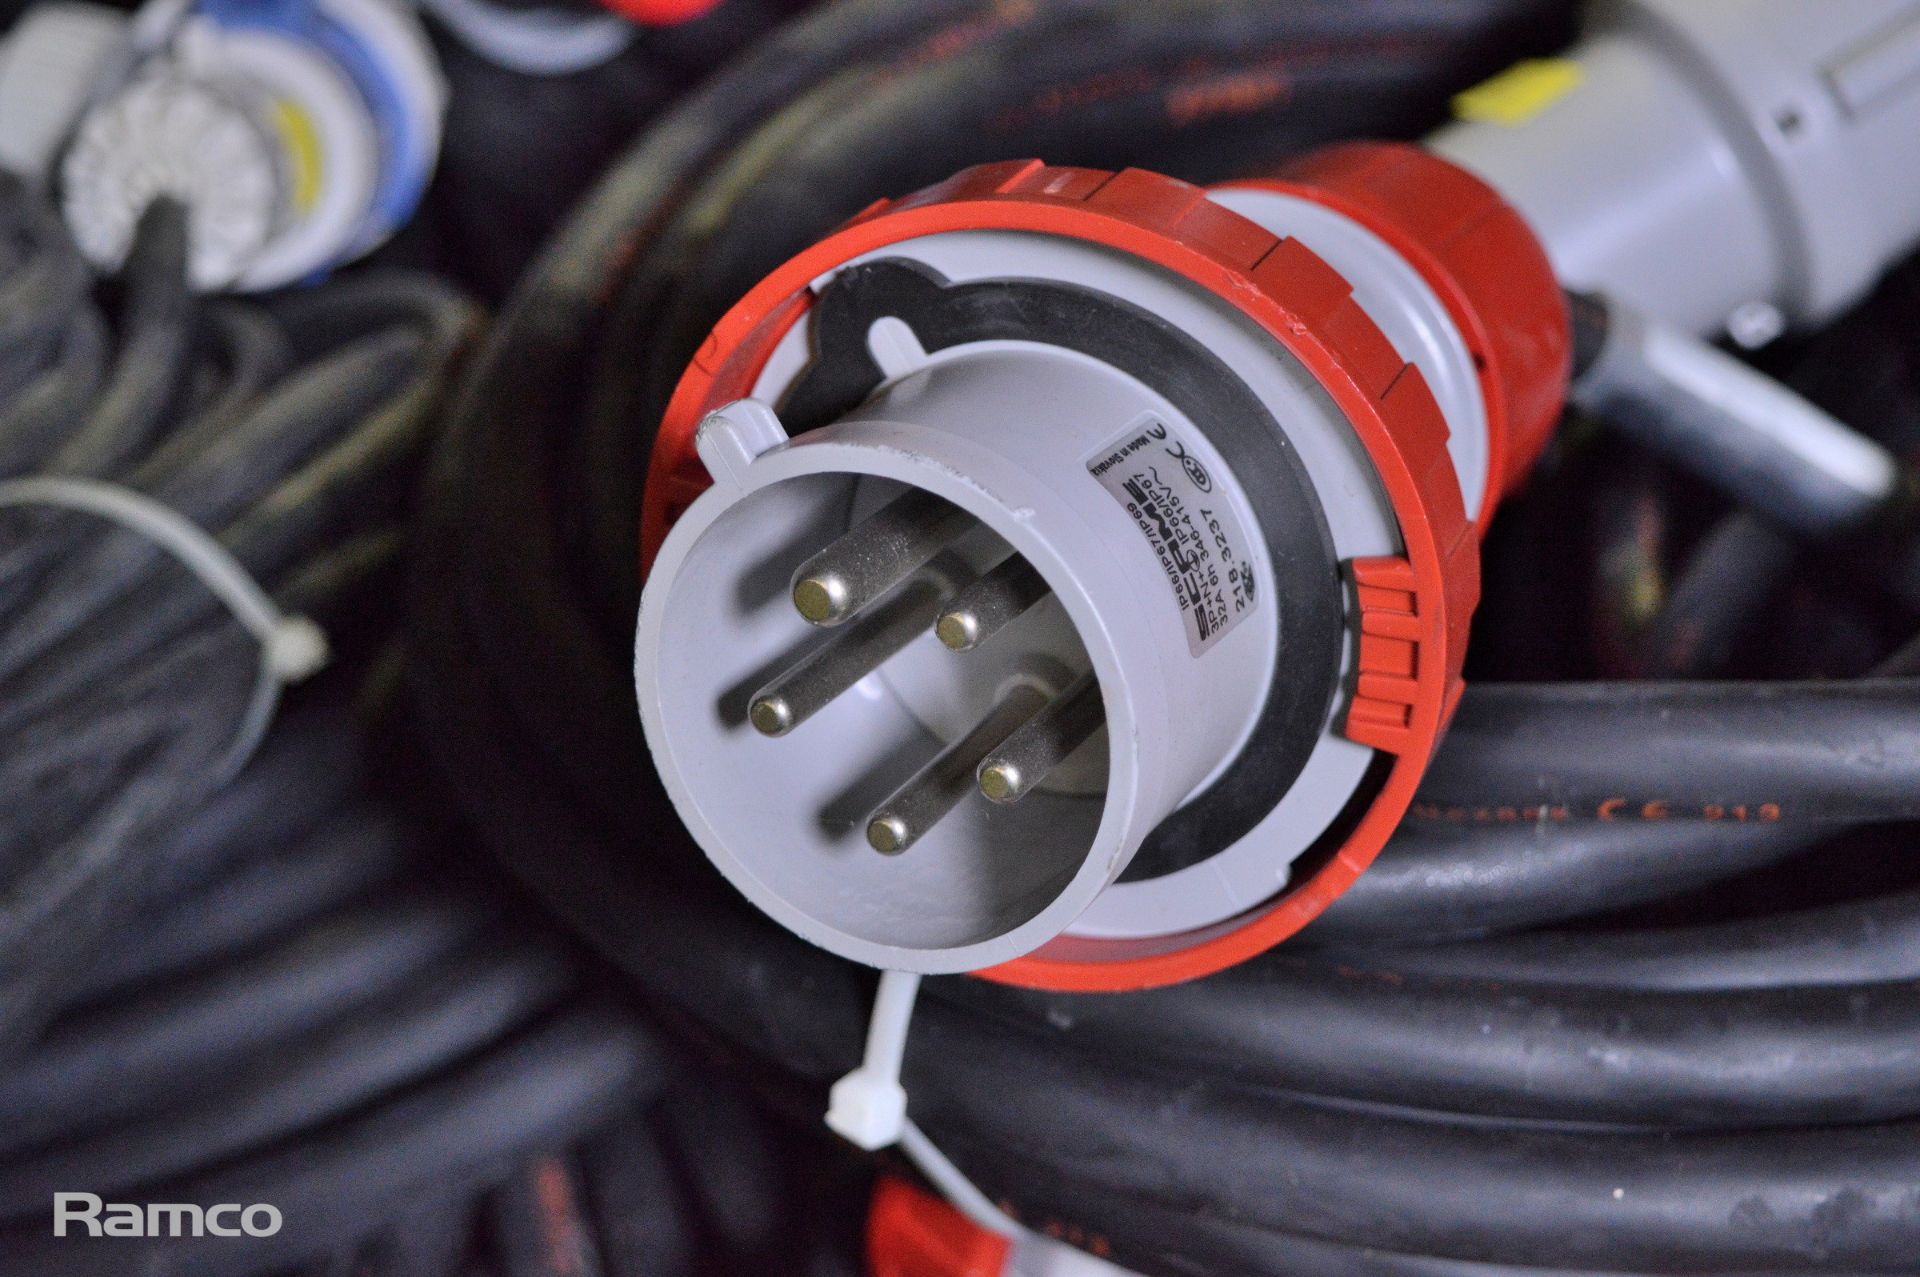 9x Electric Power Extension Cable With 32A 3Ph Couplings, 2x Electric Power Extension Cabl - Image 4 of 6